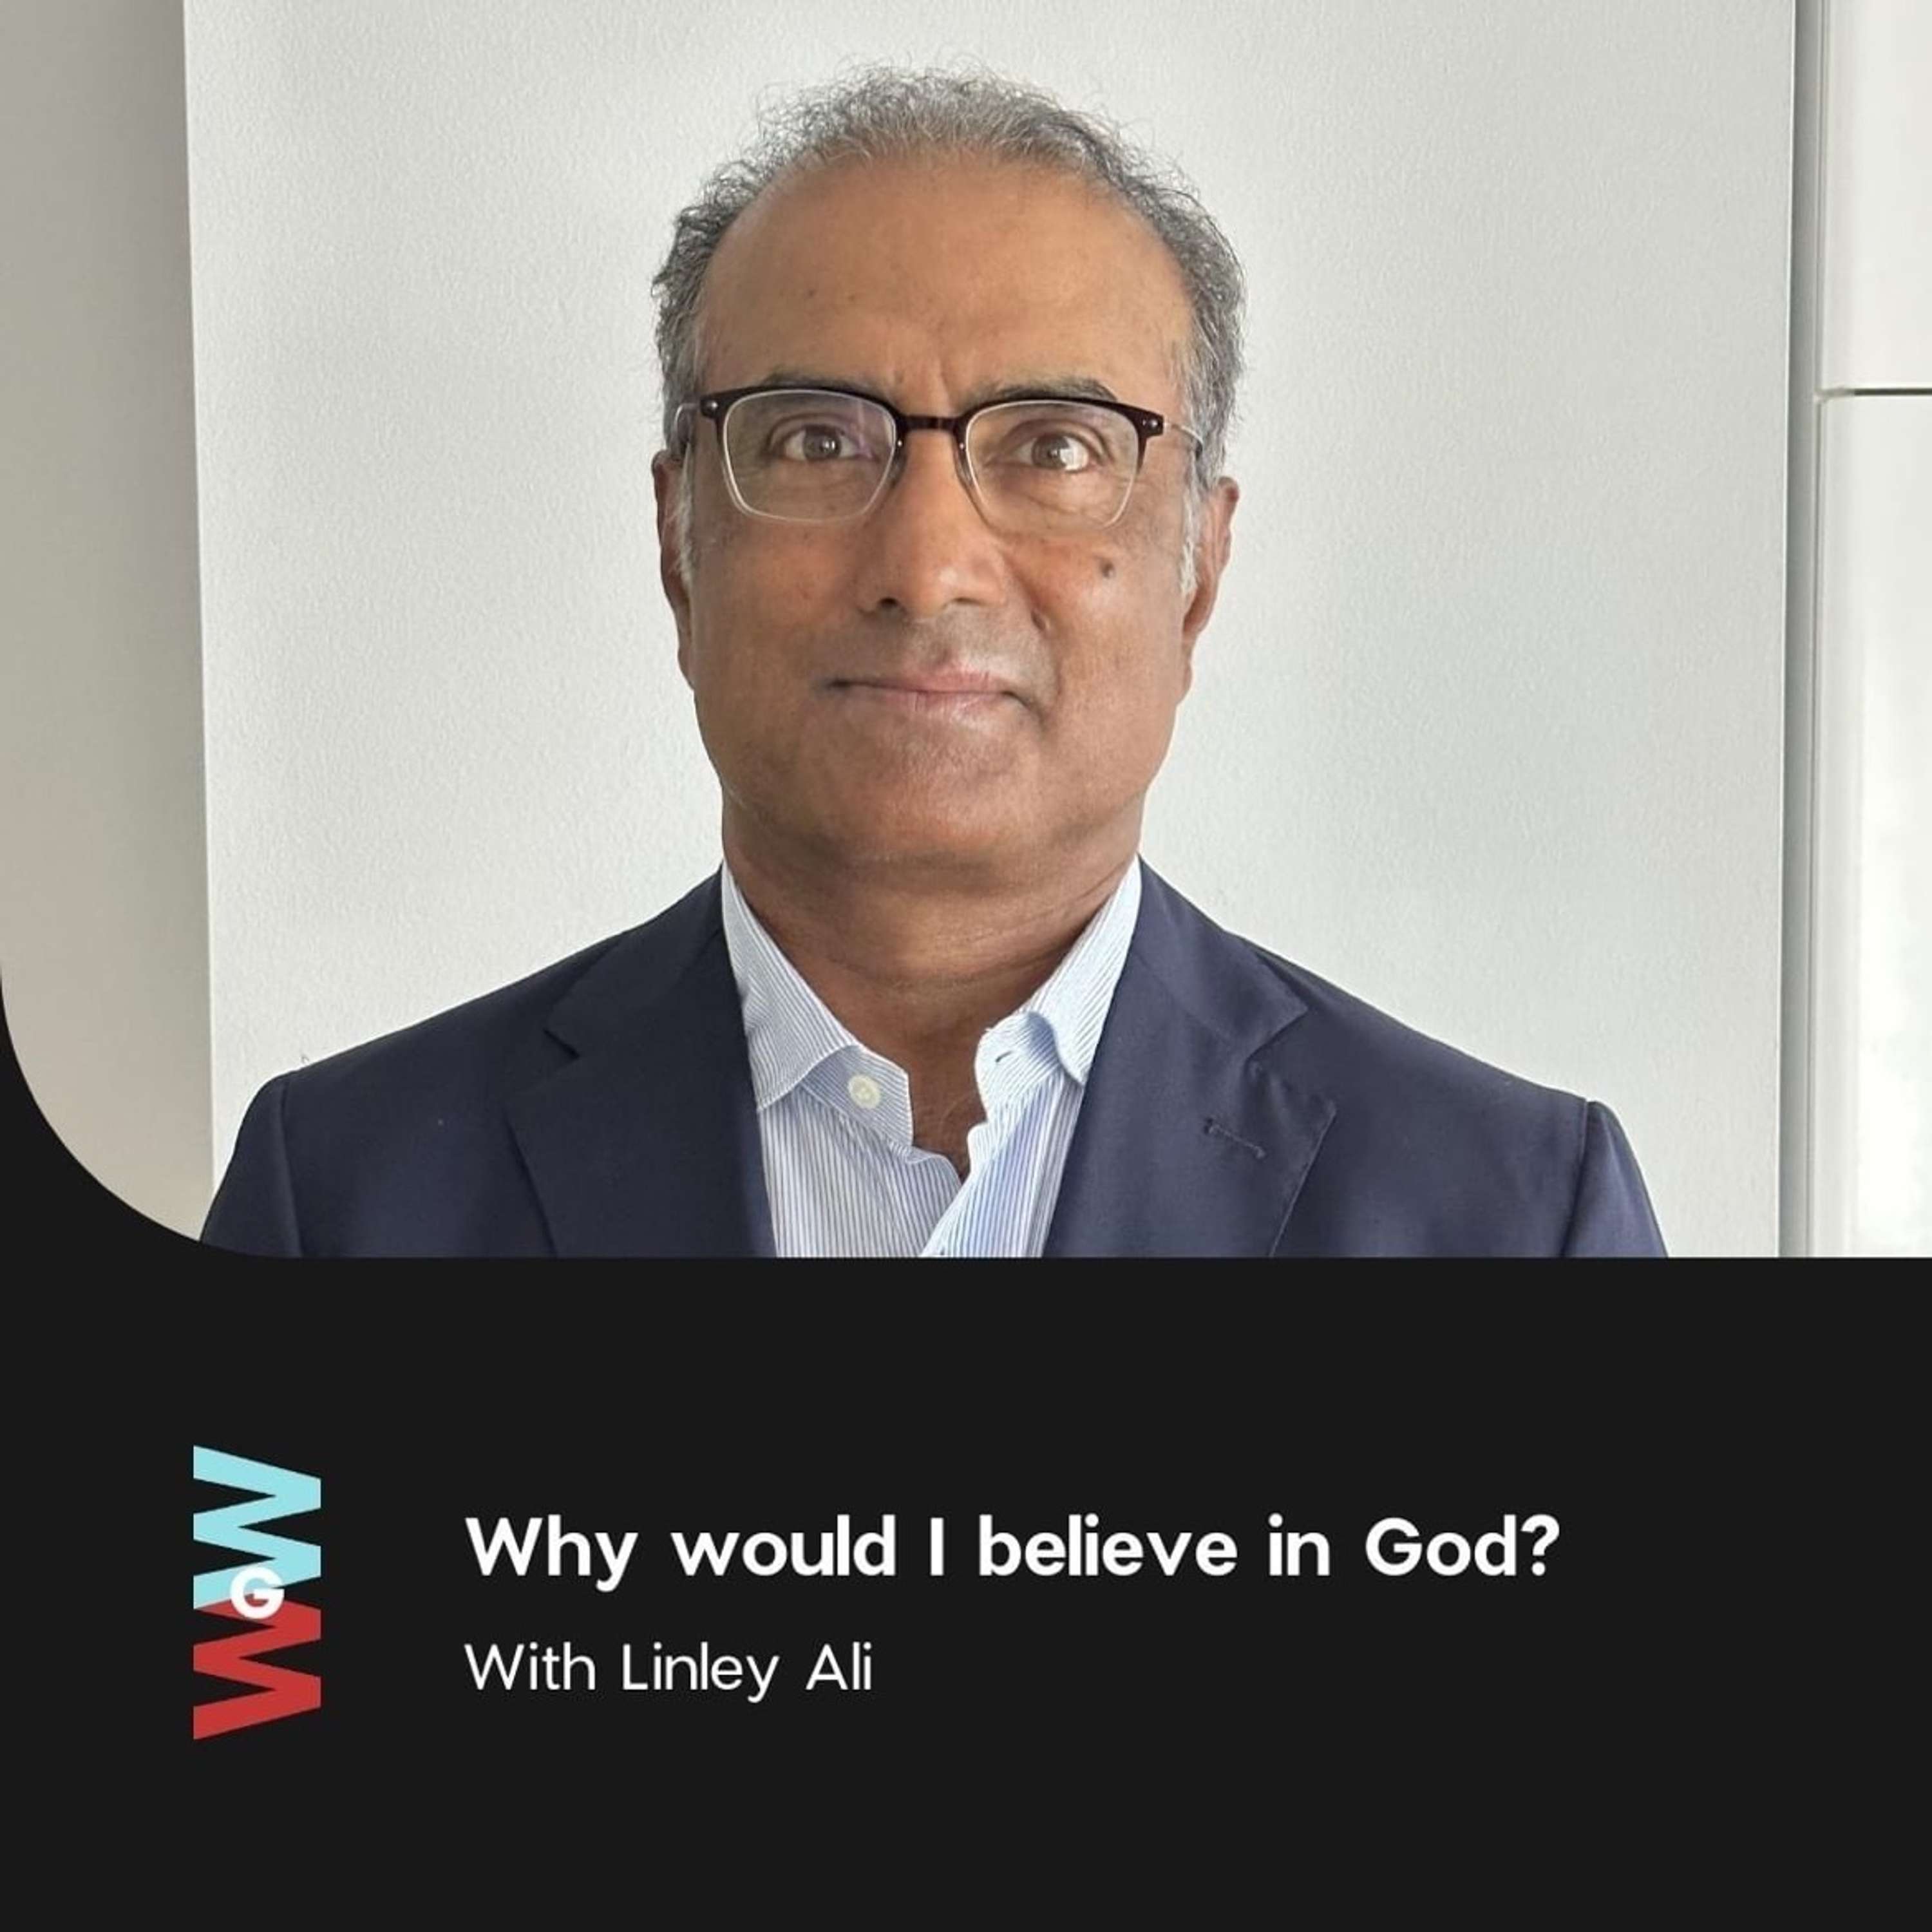 Linley Ali - Why would I believe in God?